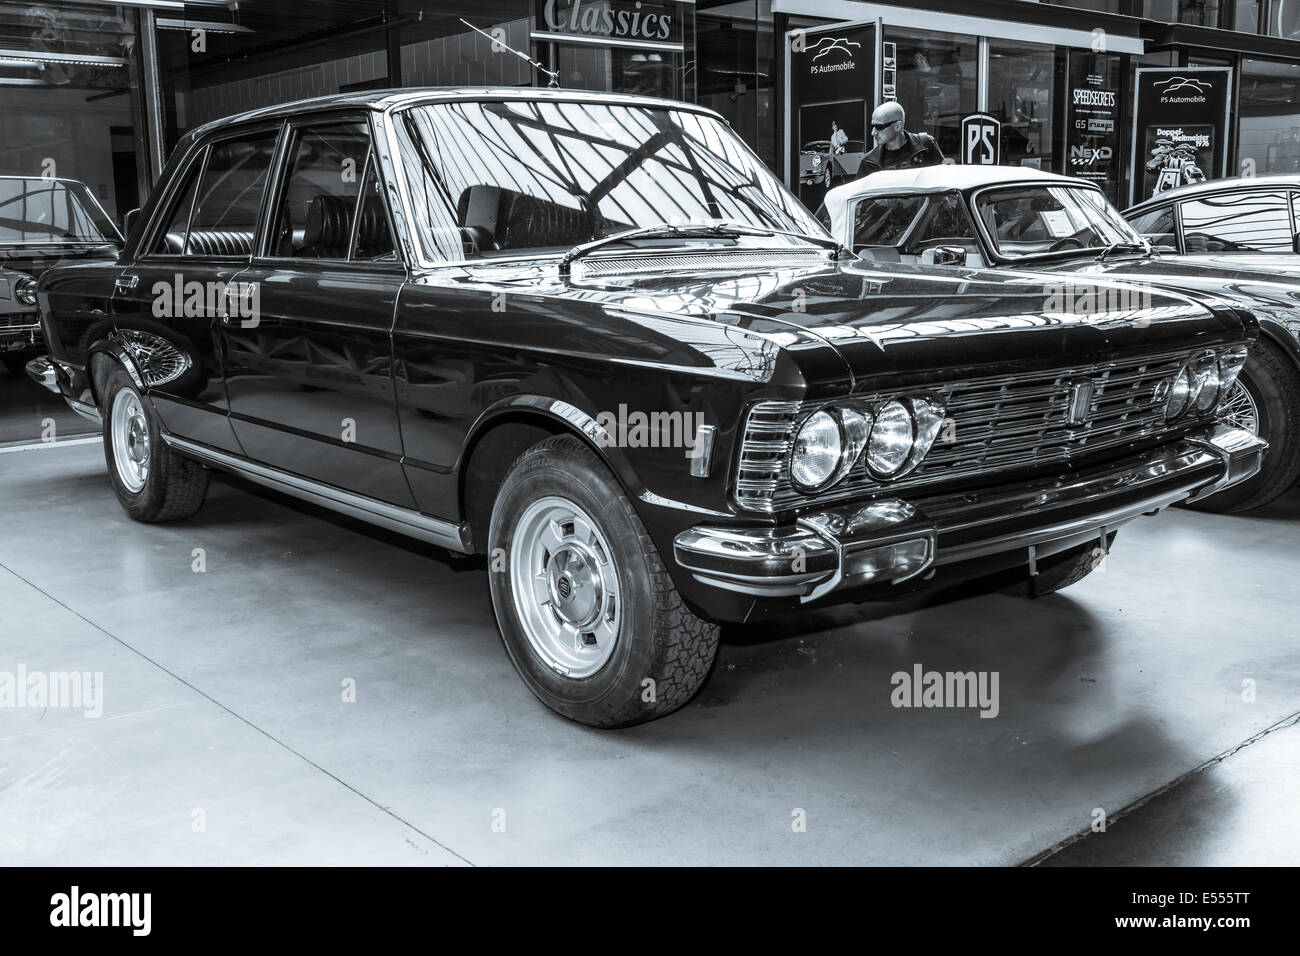 BERLIN, GERMANY - MAY 17, 2014: Executive car Fiat 130. Black and white. 27th Oldtimer Day Berlin - Brandenburg Stock Photo